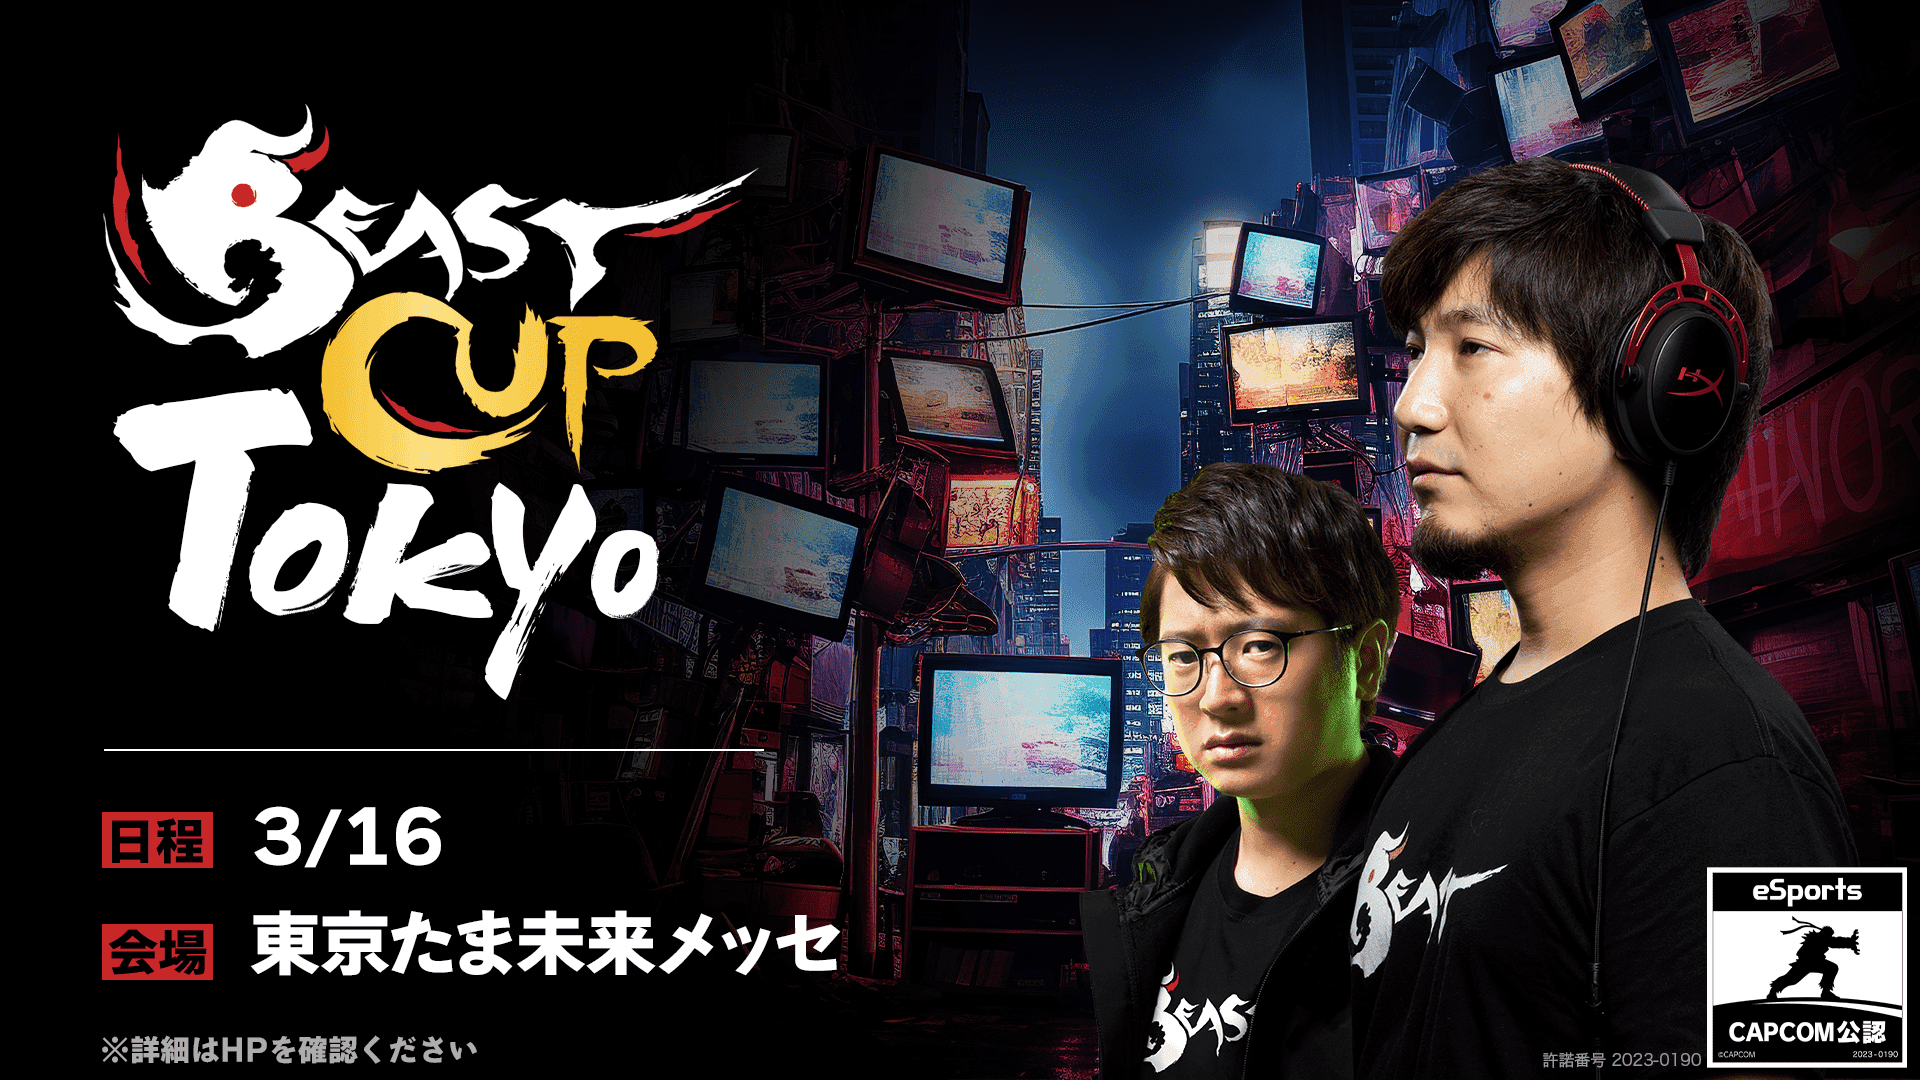 BeastCup Tokyo feature image